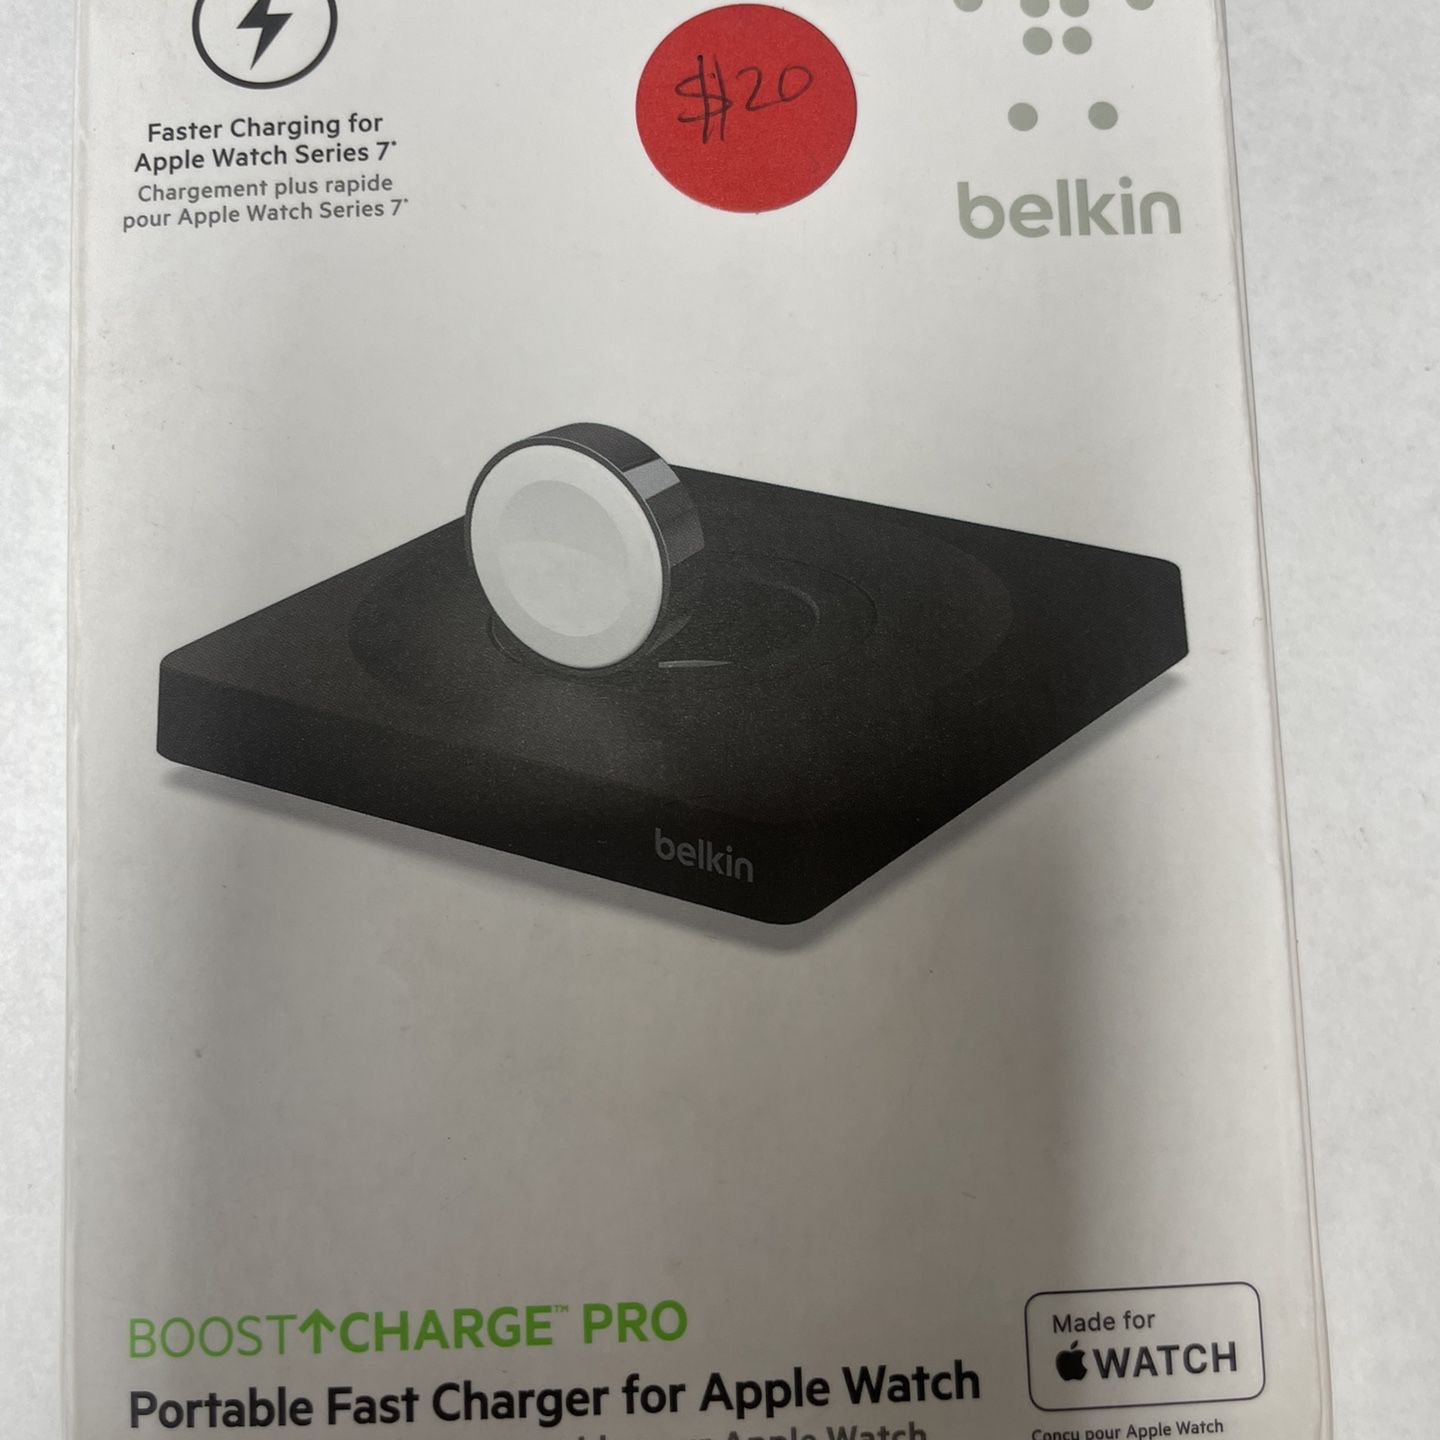 belkin portable fast charger apple watch very fast